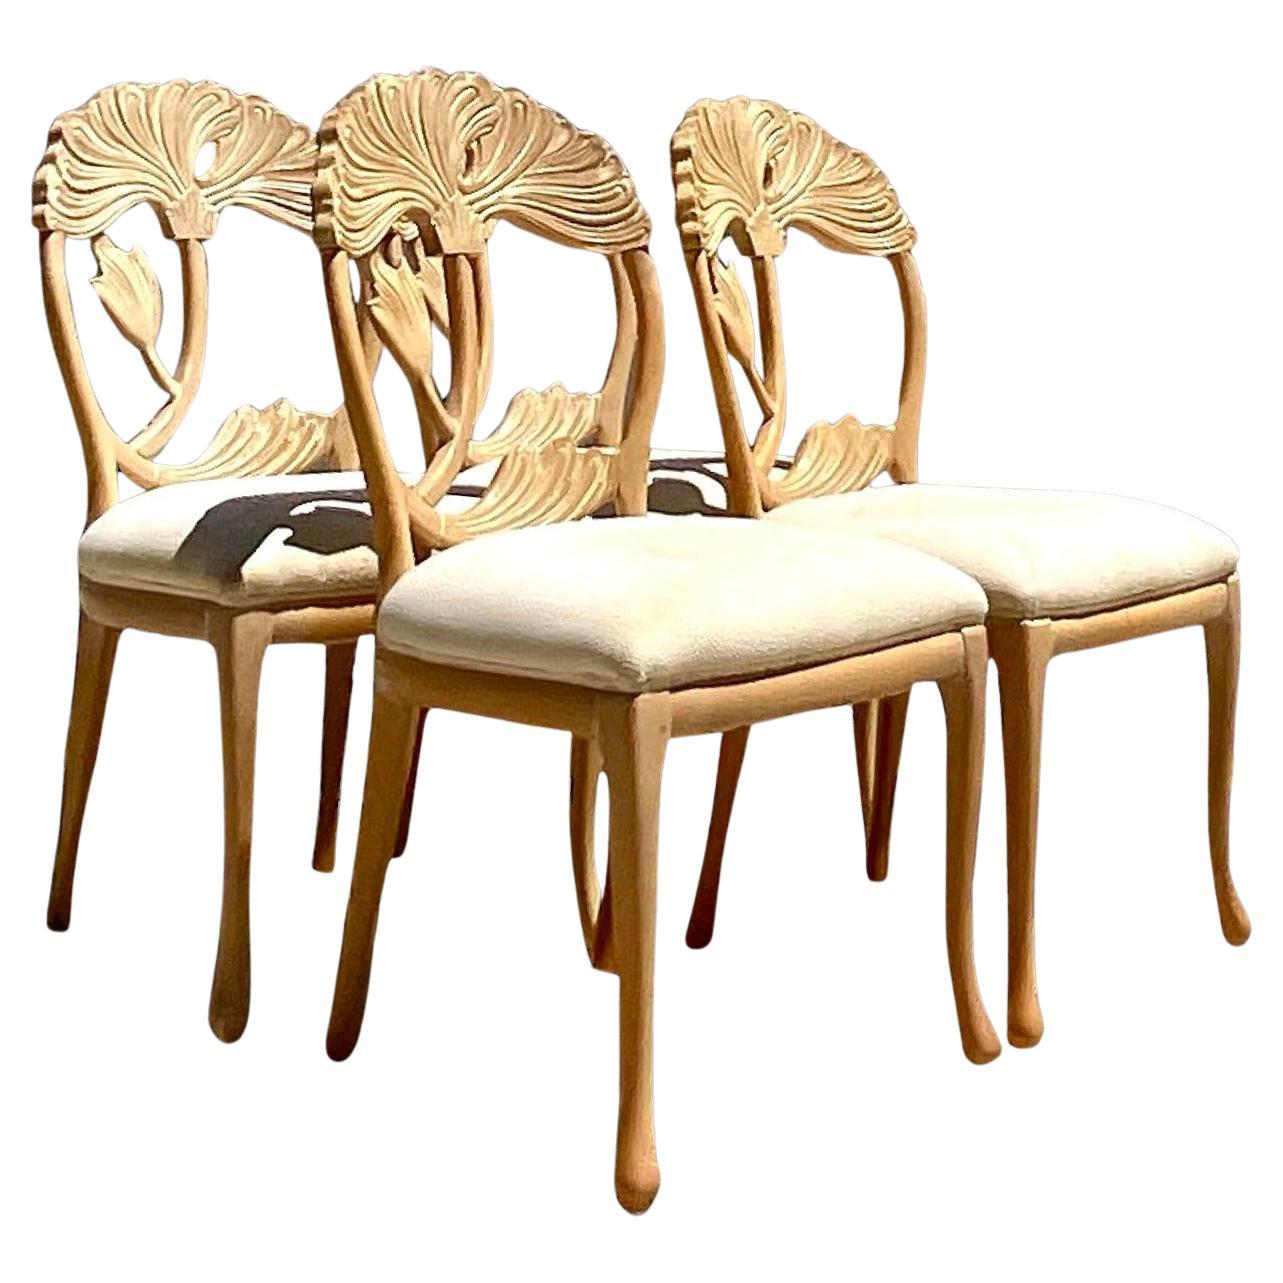 Vintage Boho Carved Lotus Blossom Dining Chairs - Set of 4 For Sale